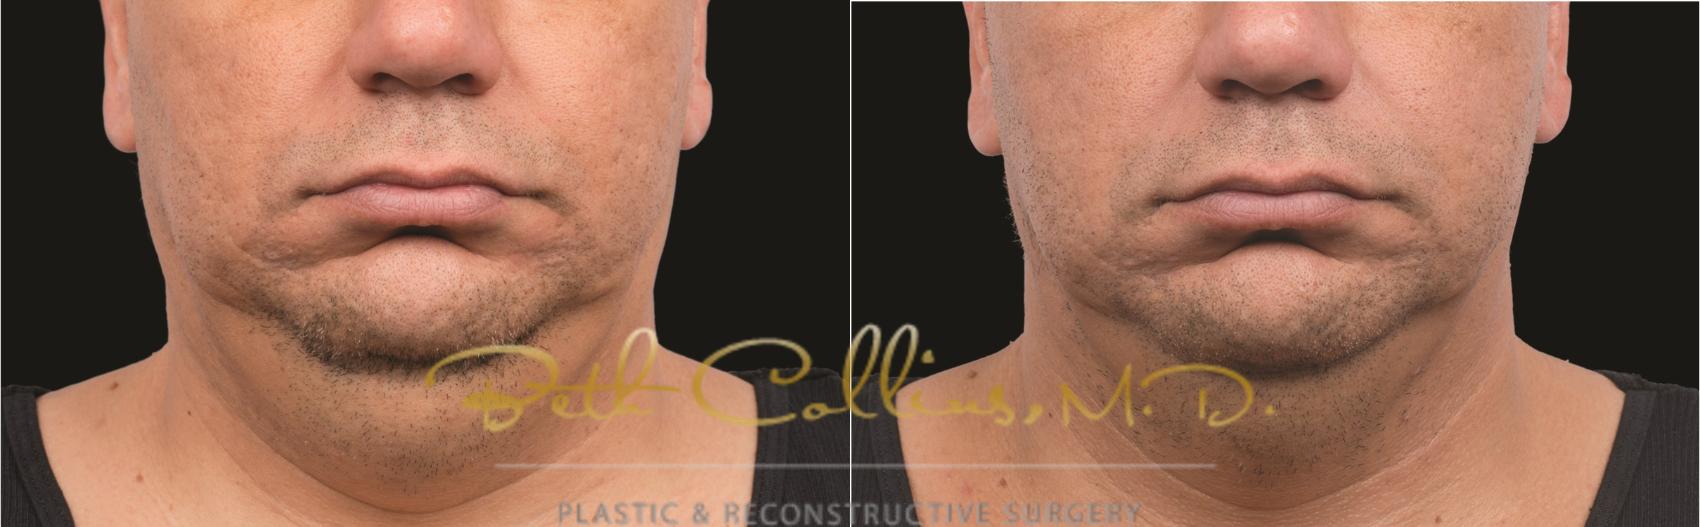 Body Contouring After Weight Loss Before and After Photo Gallery, Guilford, CT